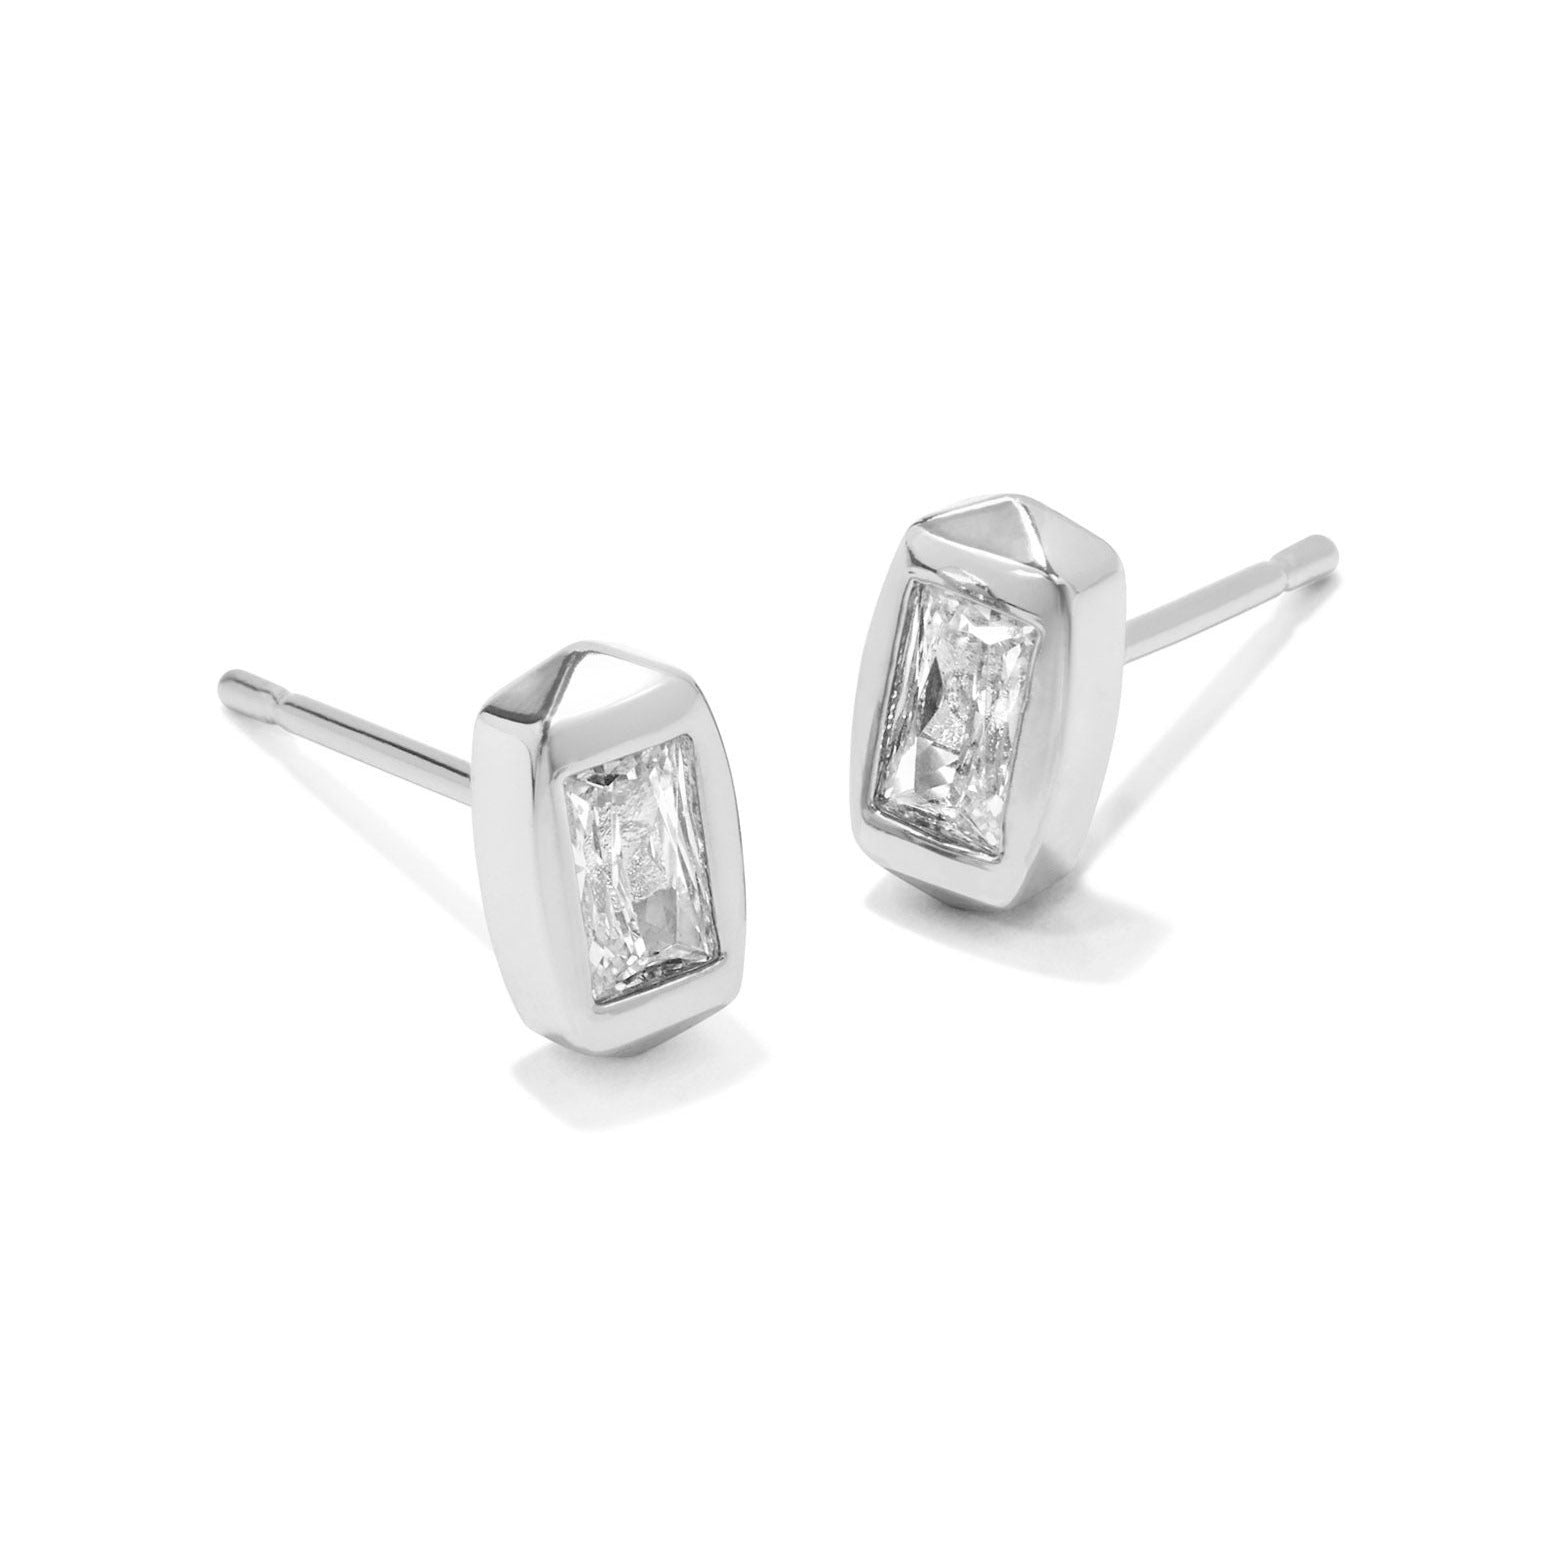 Kendra Scott | Fern Silver Crystal Stud Earrings in White Crystal - Giddy Up Glamour Boutique